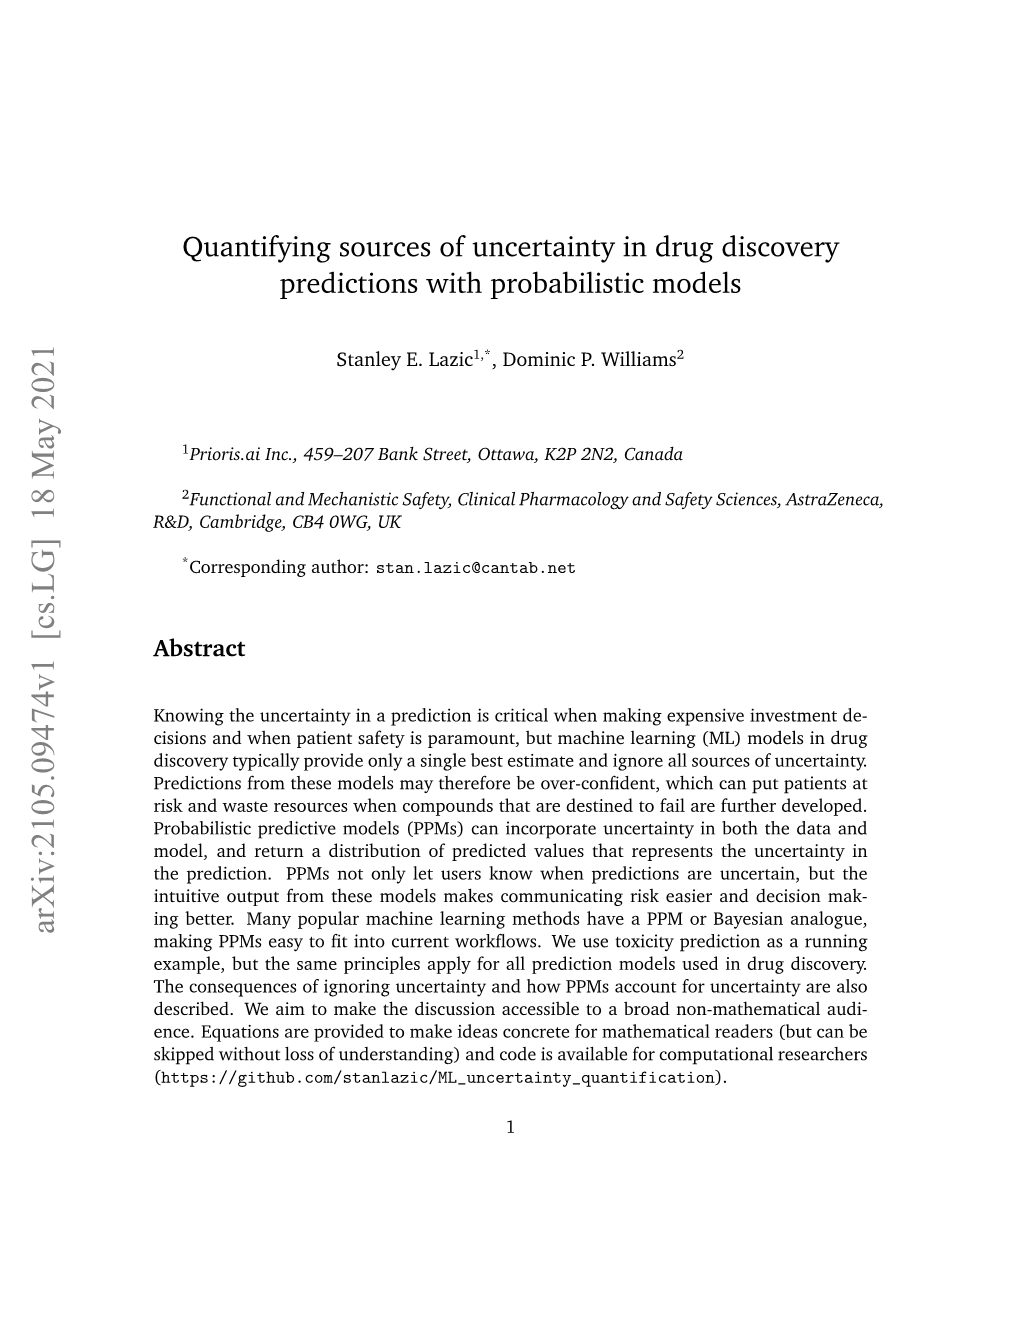 Quantifying Sources of Uncertainty in Drug Discovery Predictions with Probabilistic Models